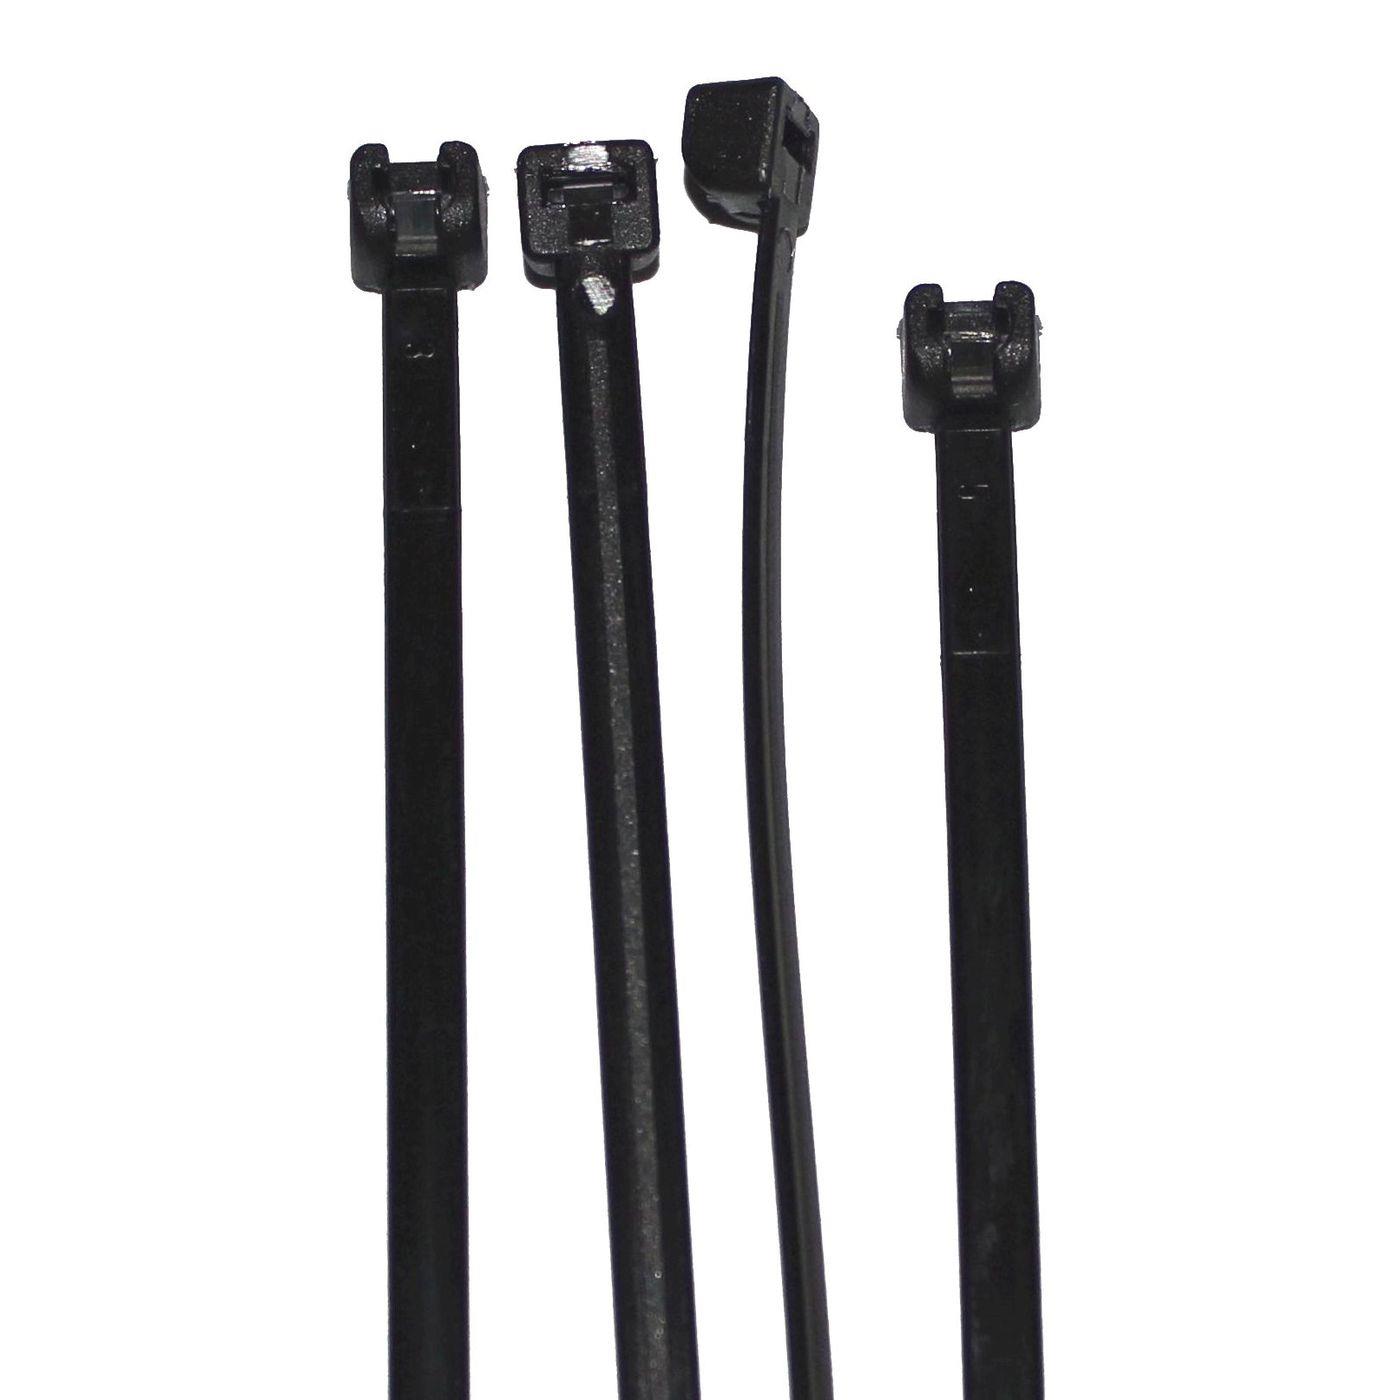 100x Cable tie with Metal tongue 200 x 3,5mm Black 40kg PA6.6 Polyamide Industrial quality